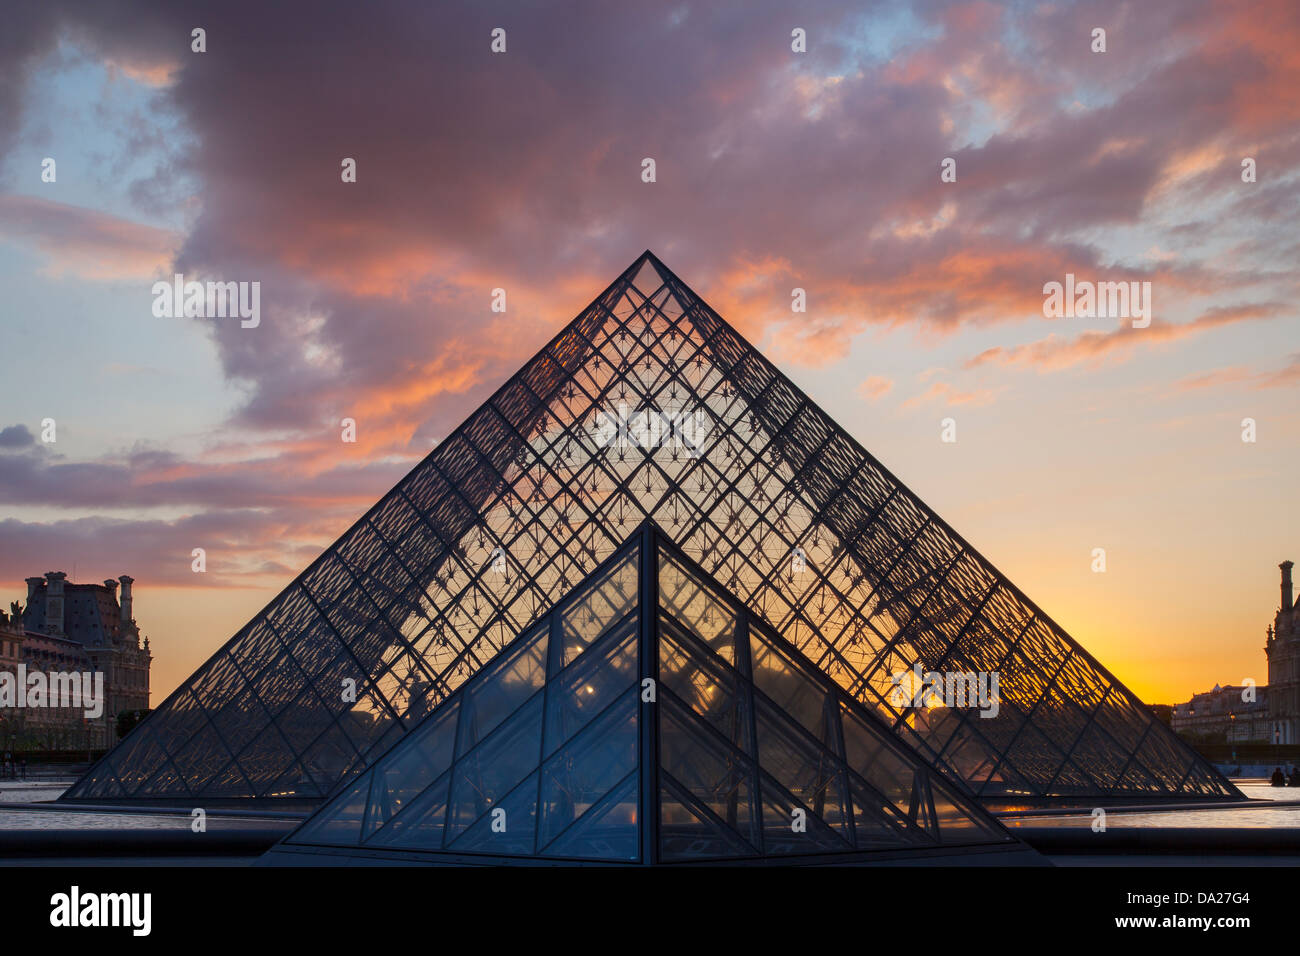 Sunset behind the glass pyramid of Musee du Louvre, Paris France Stock Photo